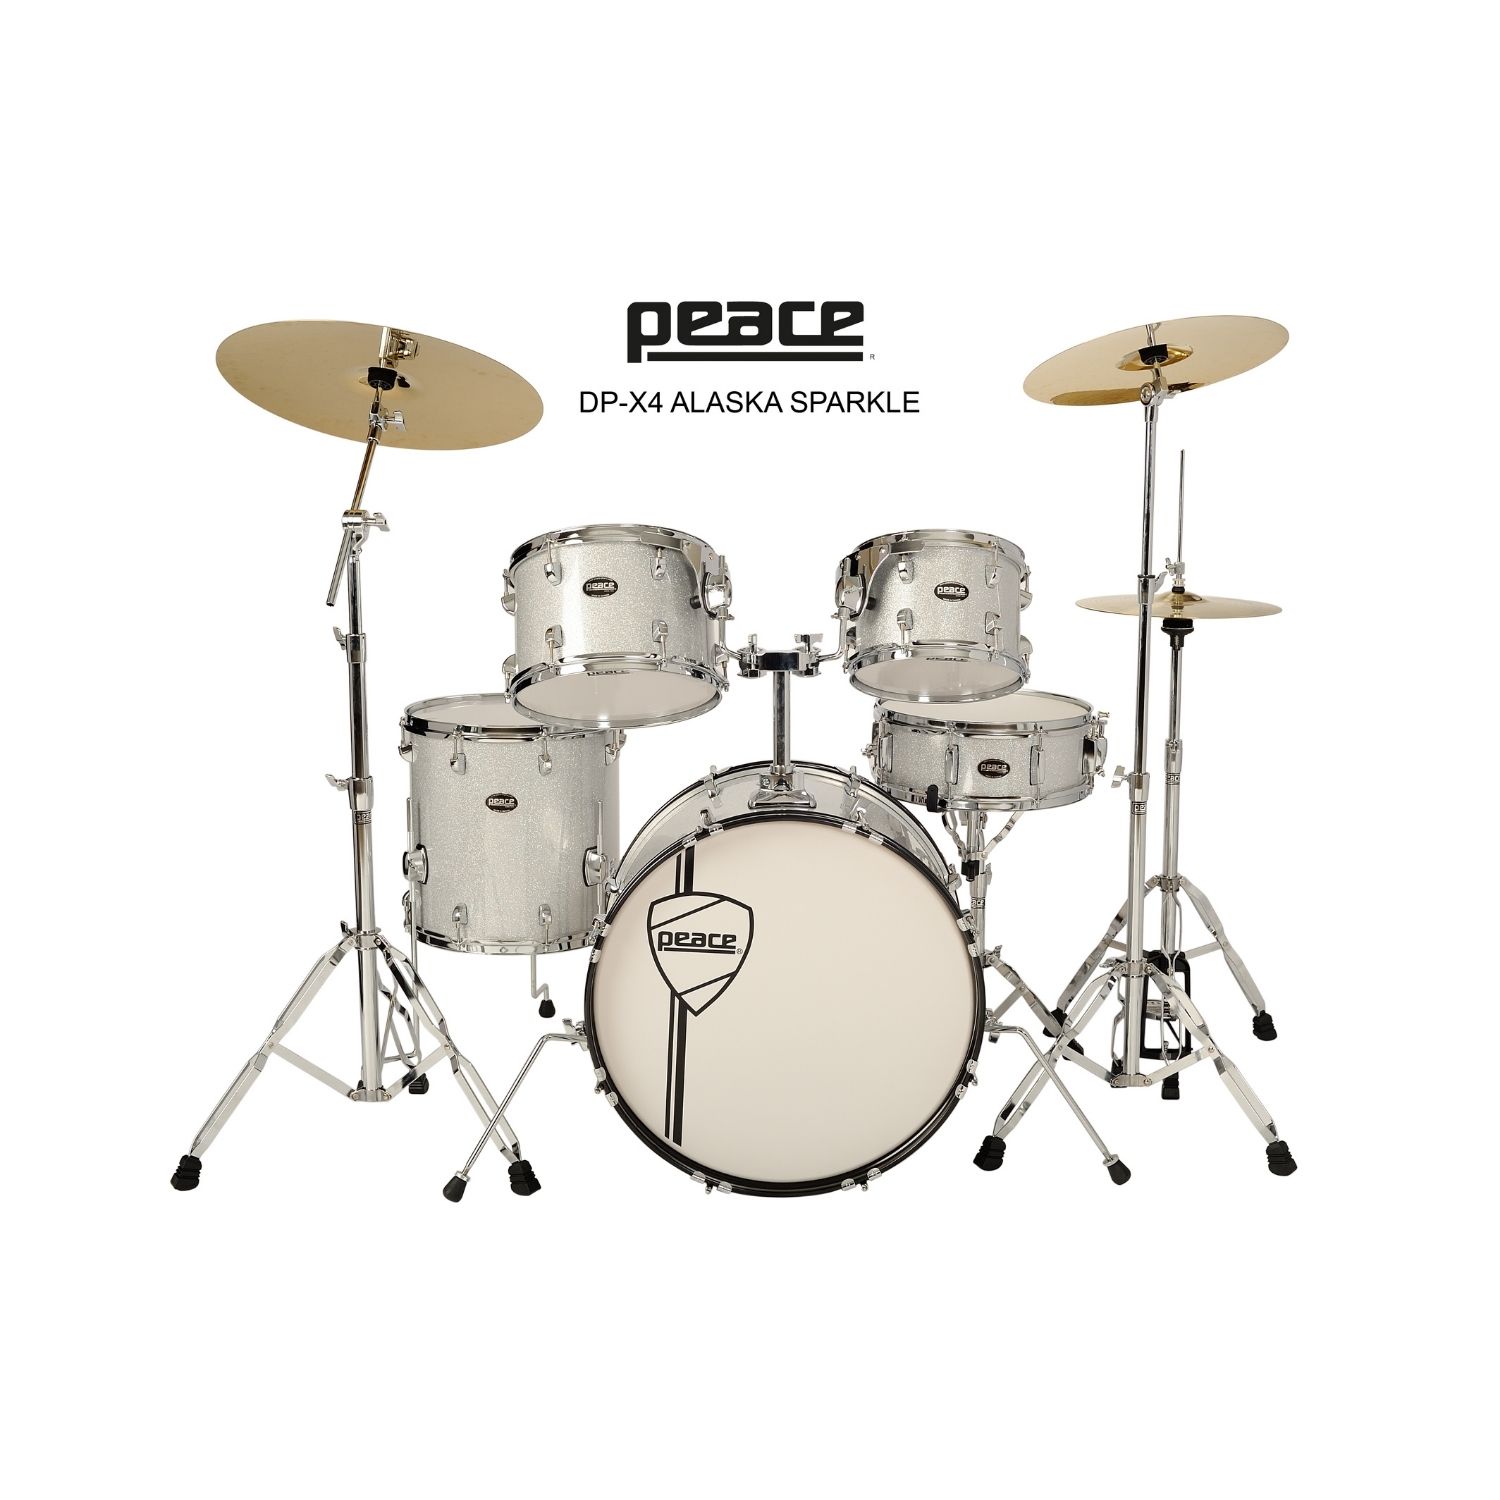 Buy silver color drumset online in india